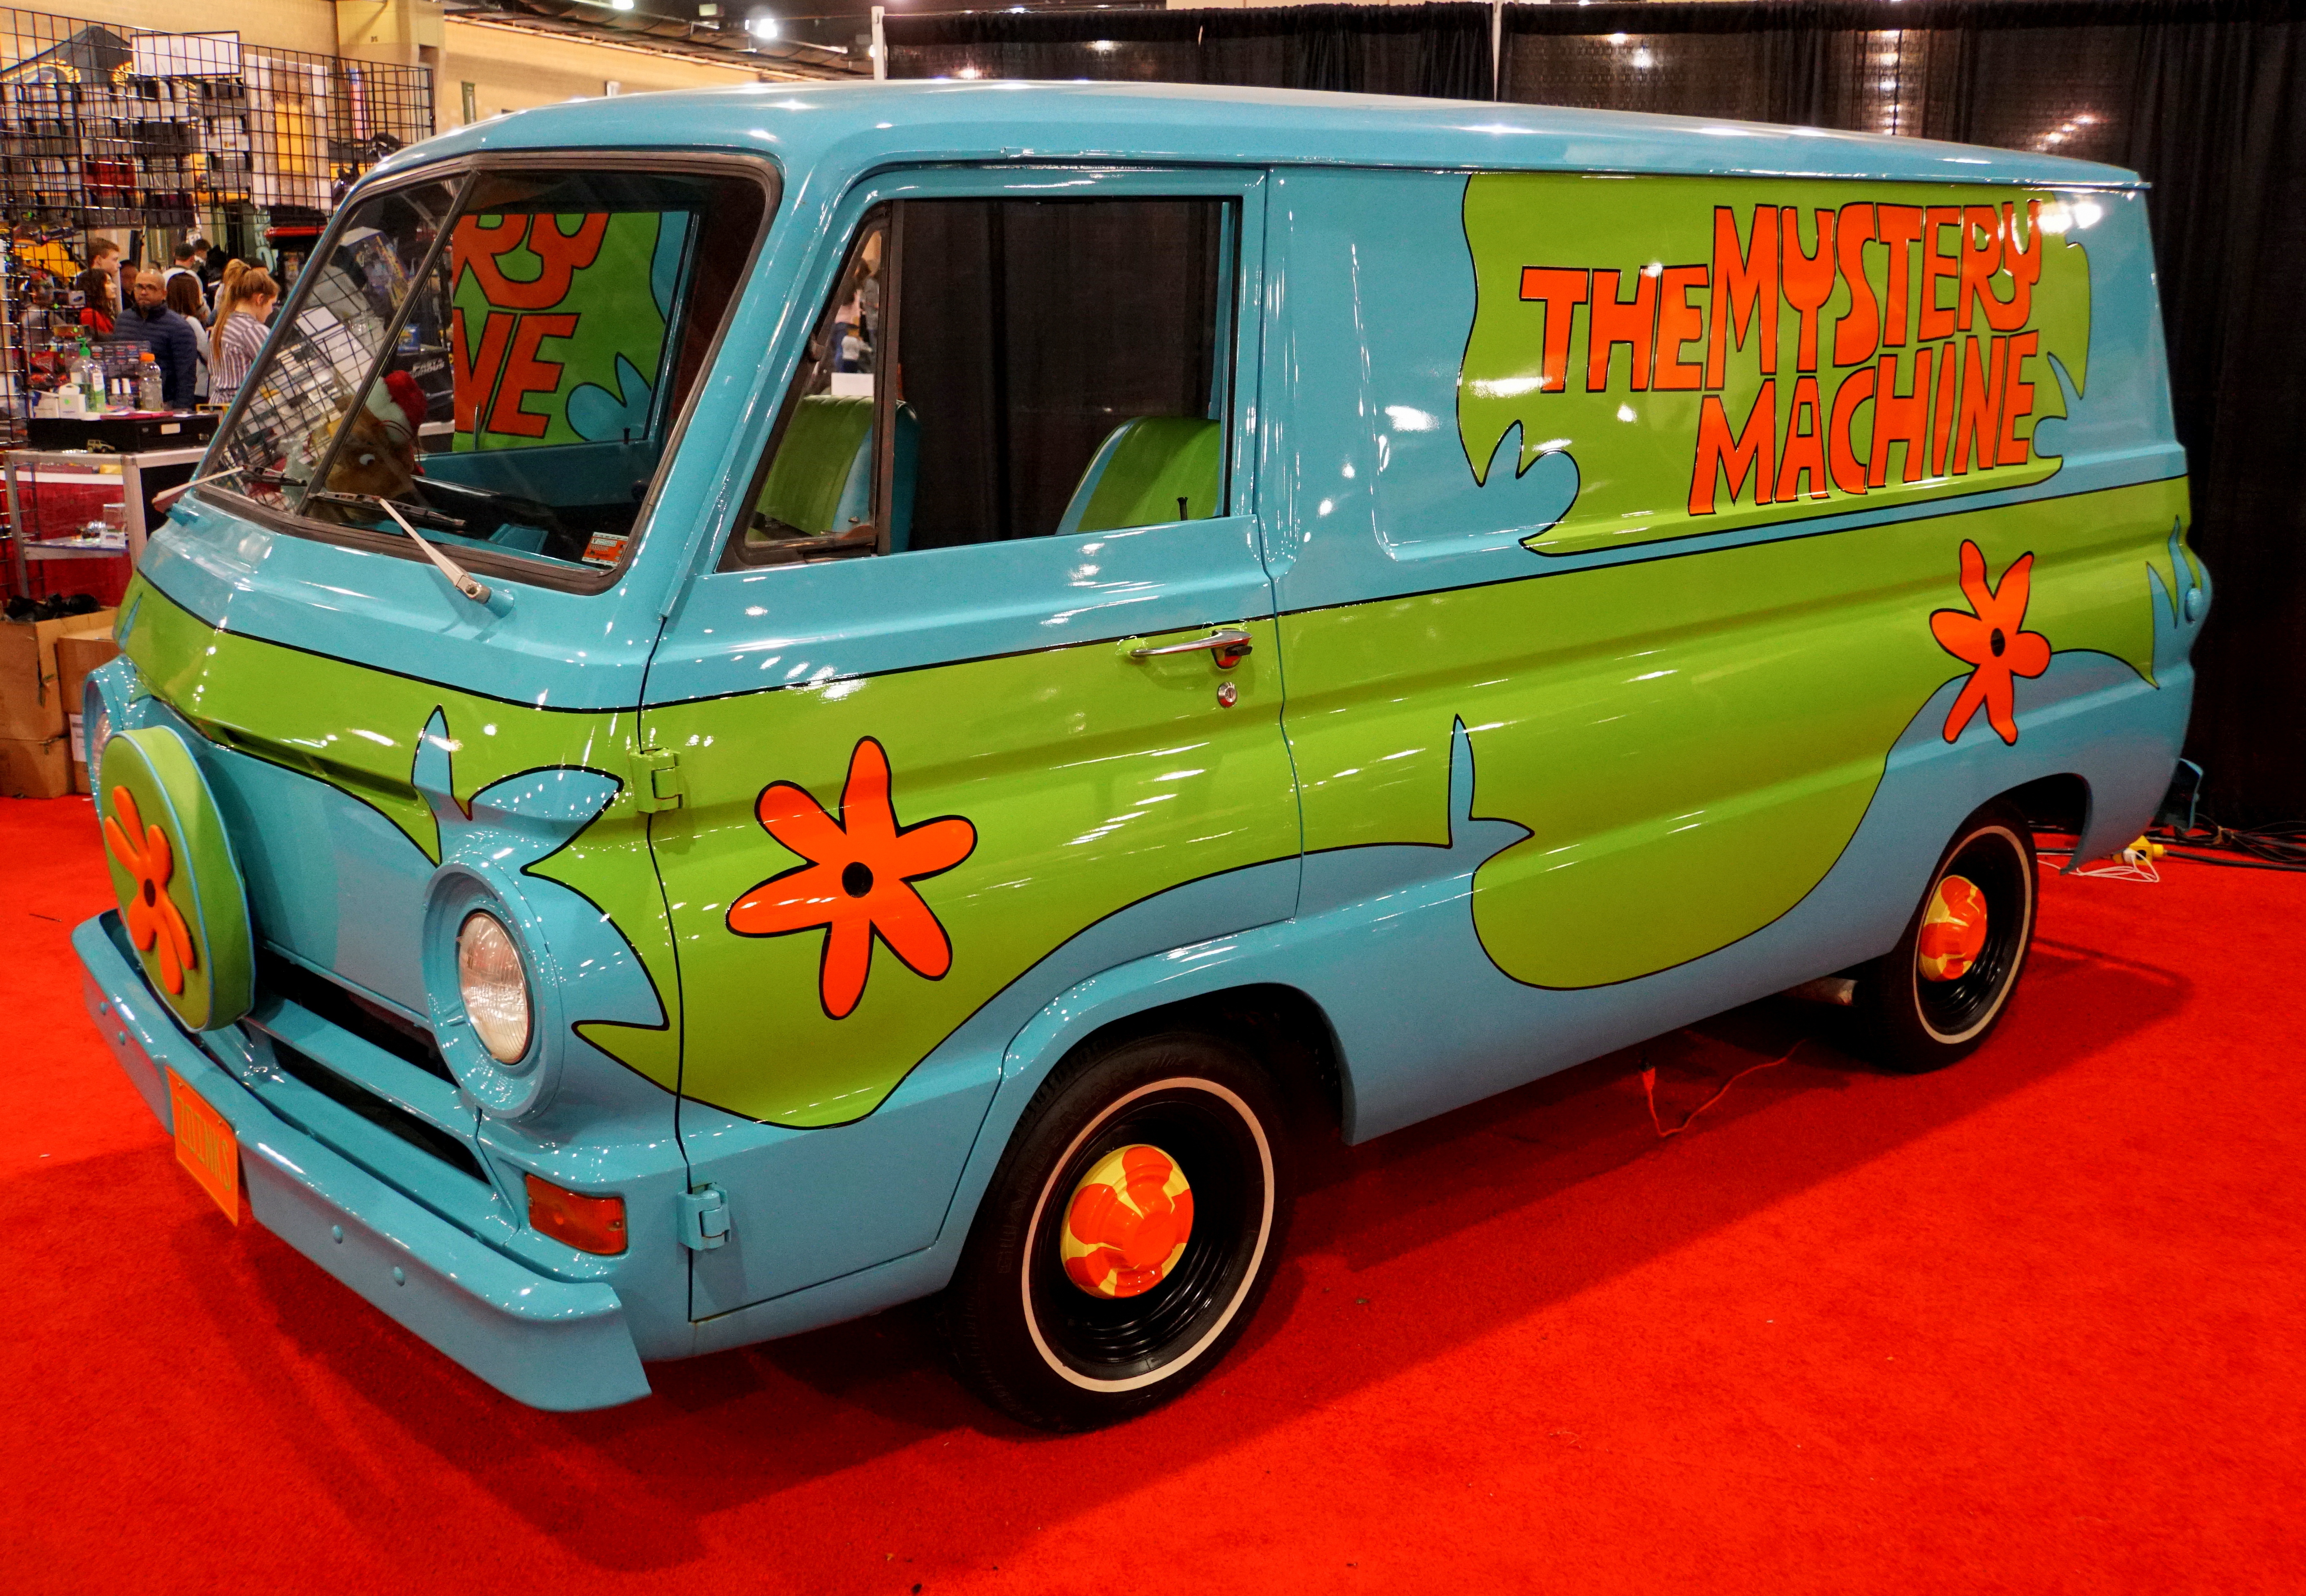 The Mystery Machine from Scooby Doo